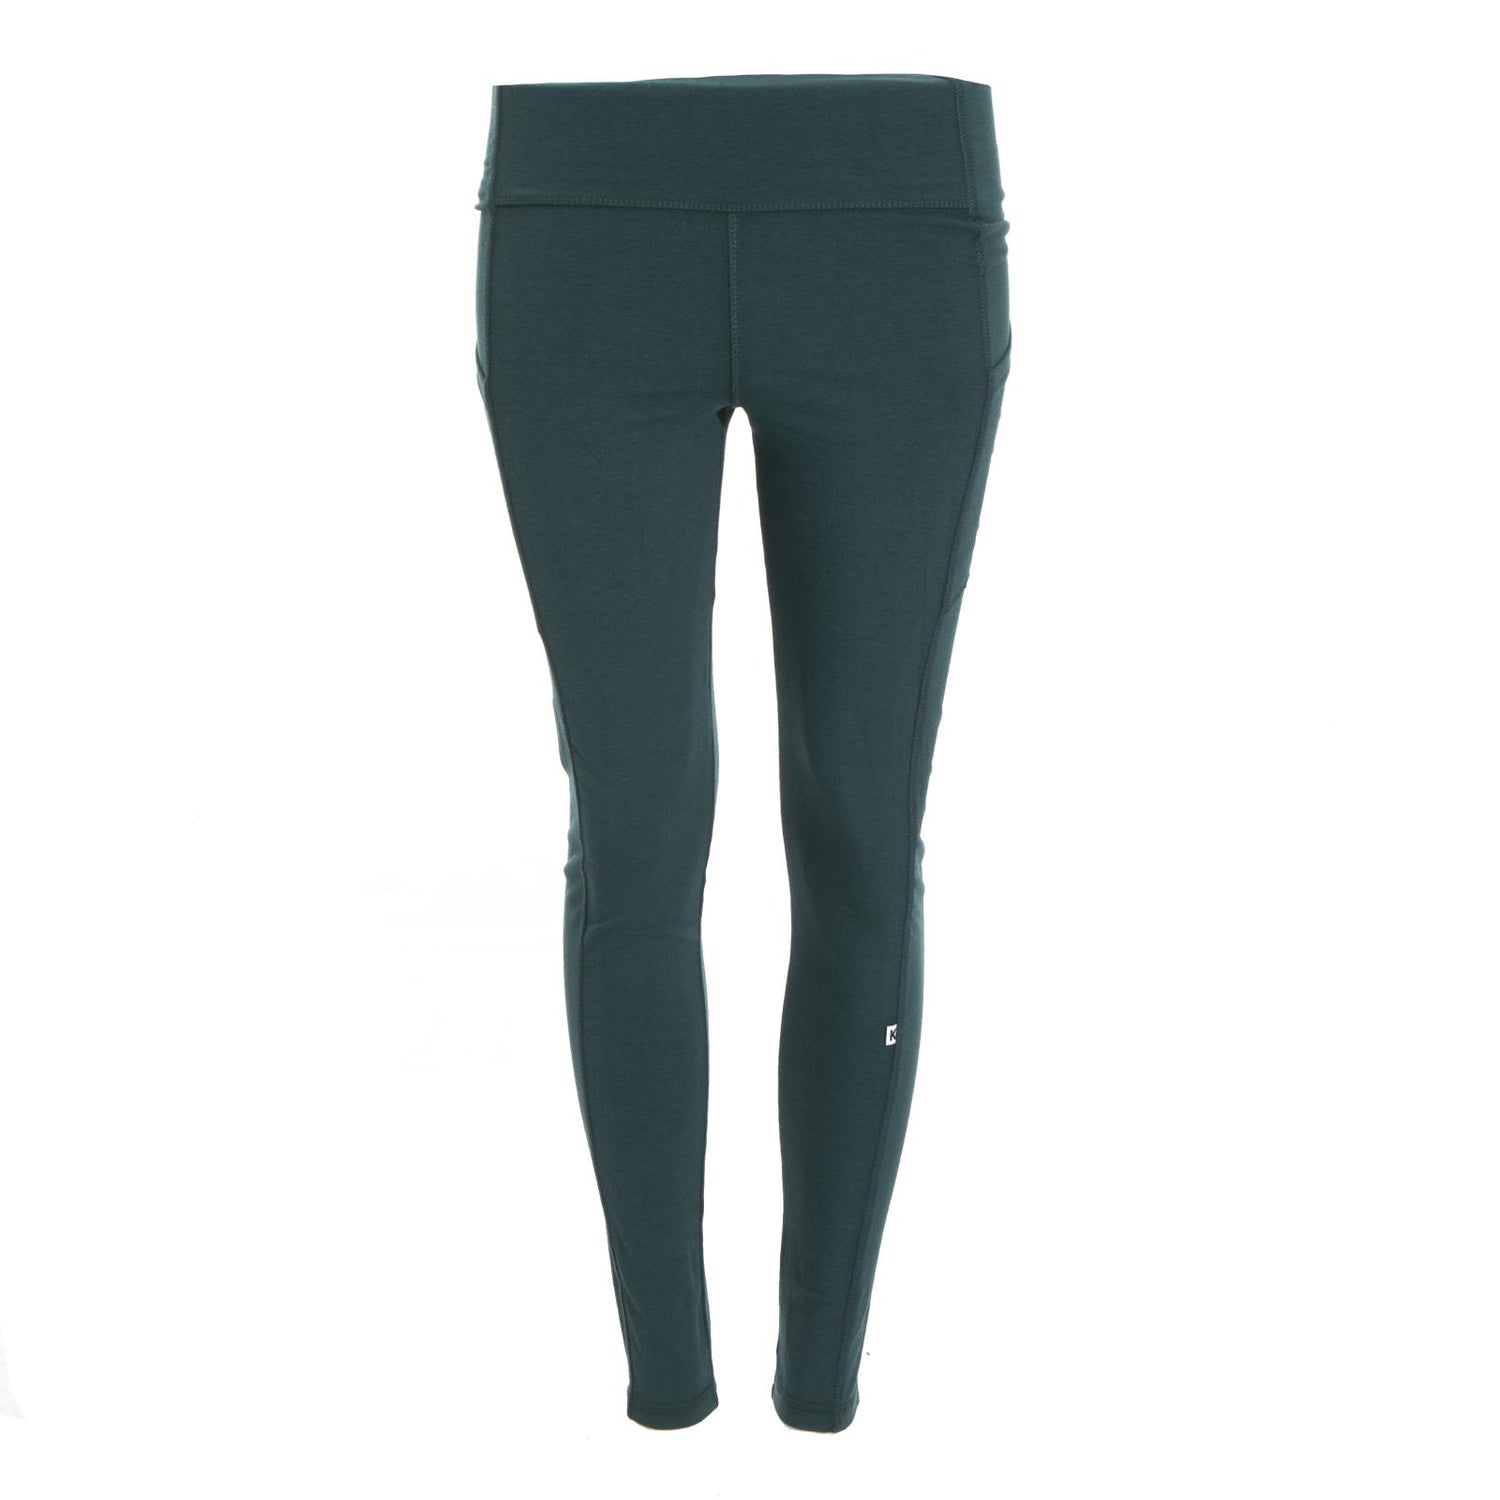 Women's Solid Luxe Stretch Leggings with Pockets in Pine